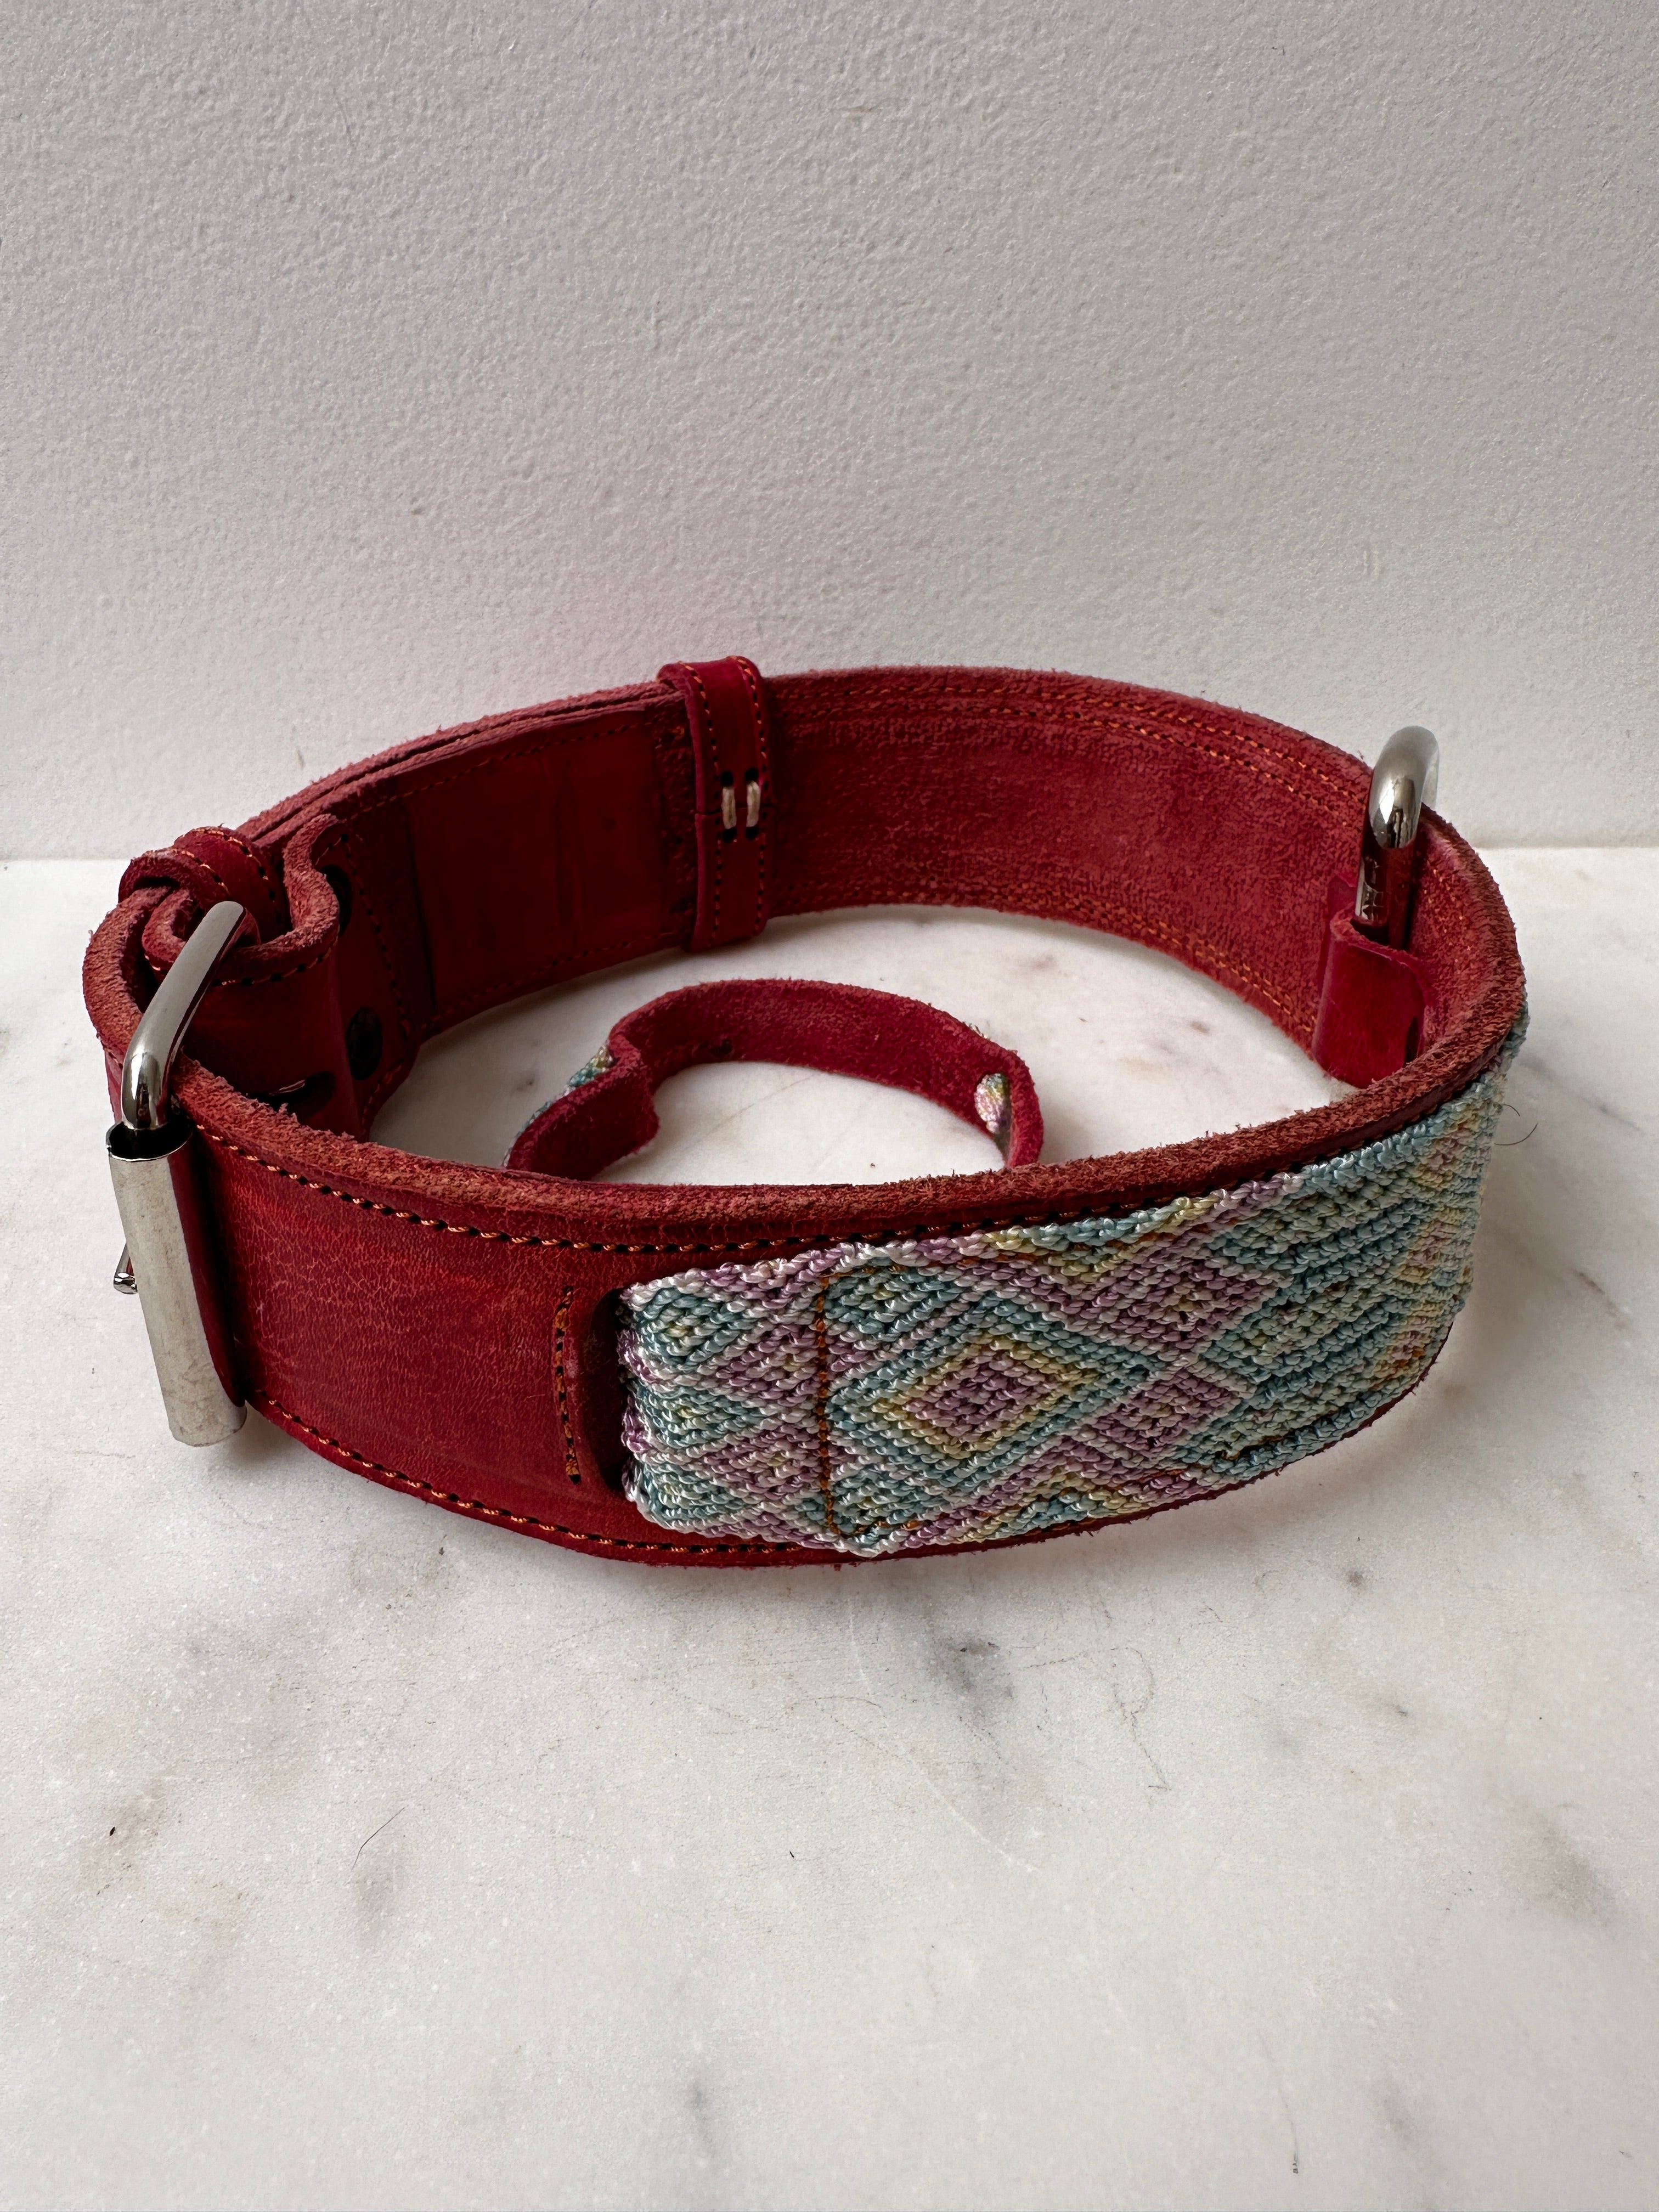 Future Nomads Homewares One Size Huichol Leather Wide Dog Collar L4